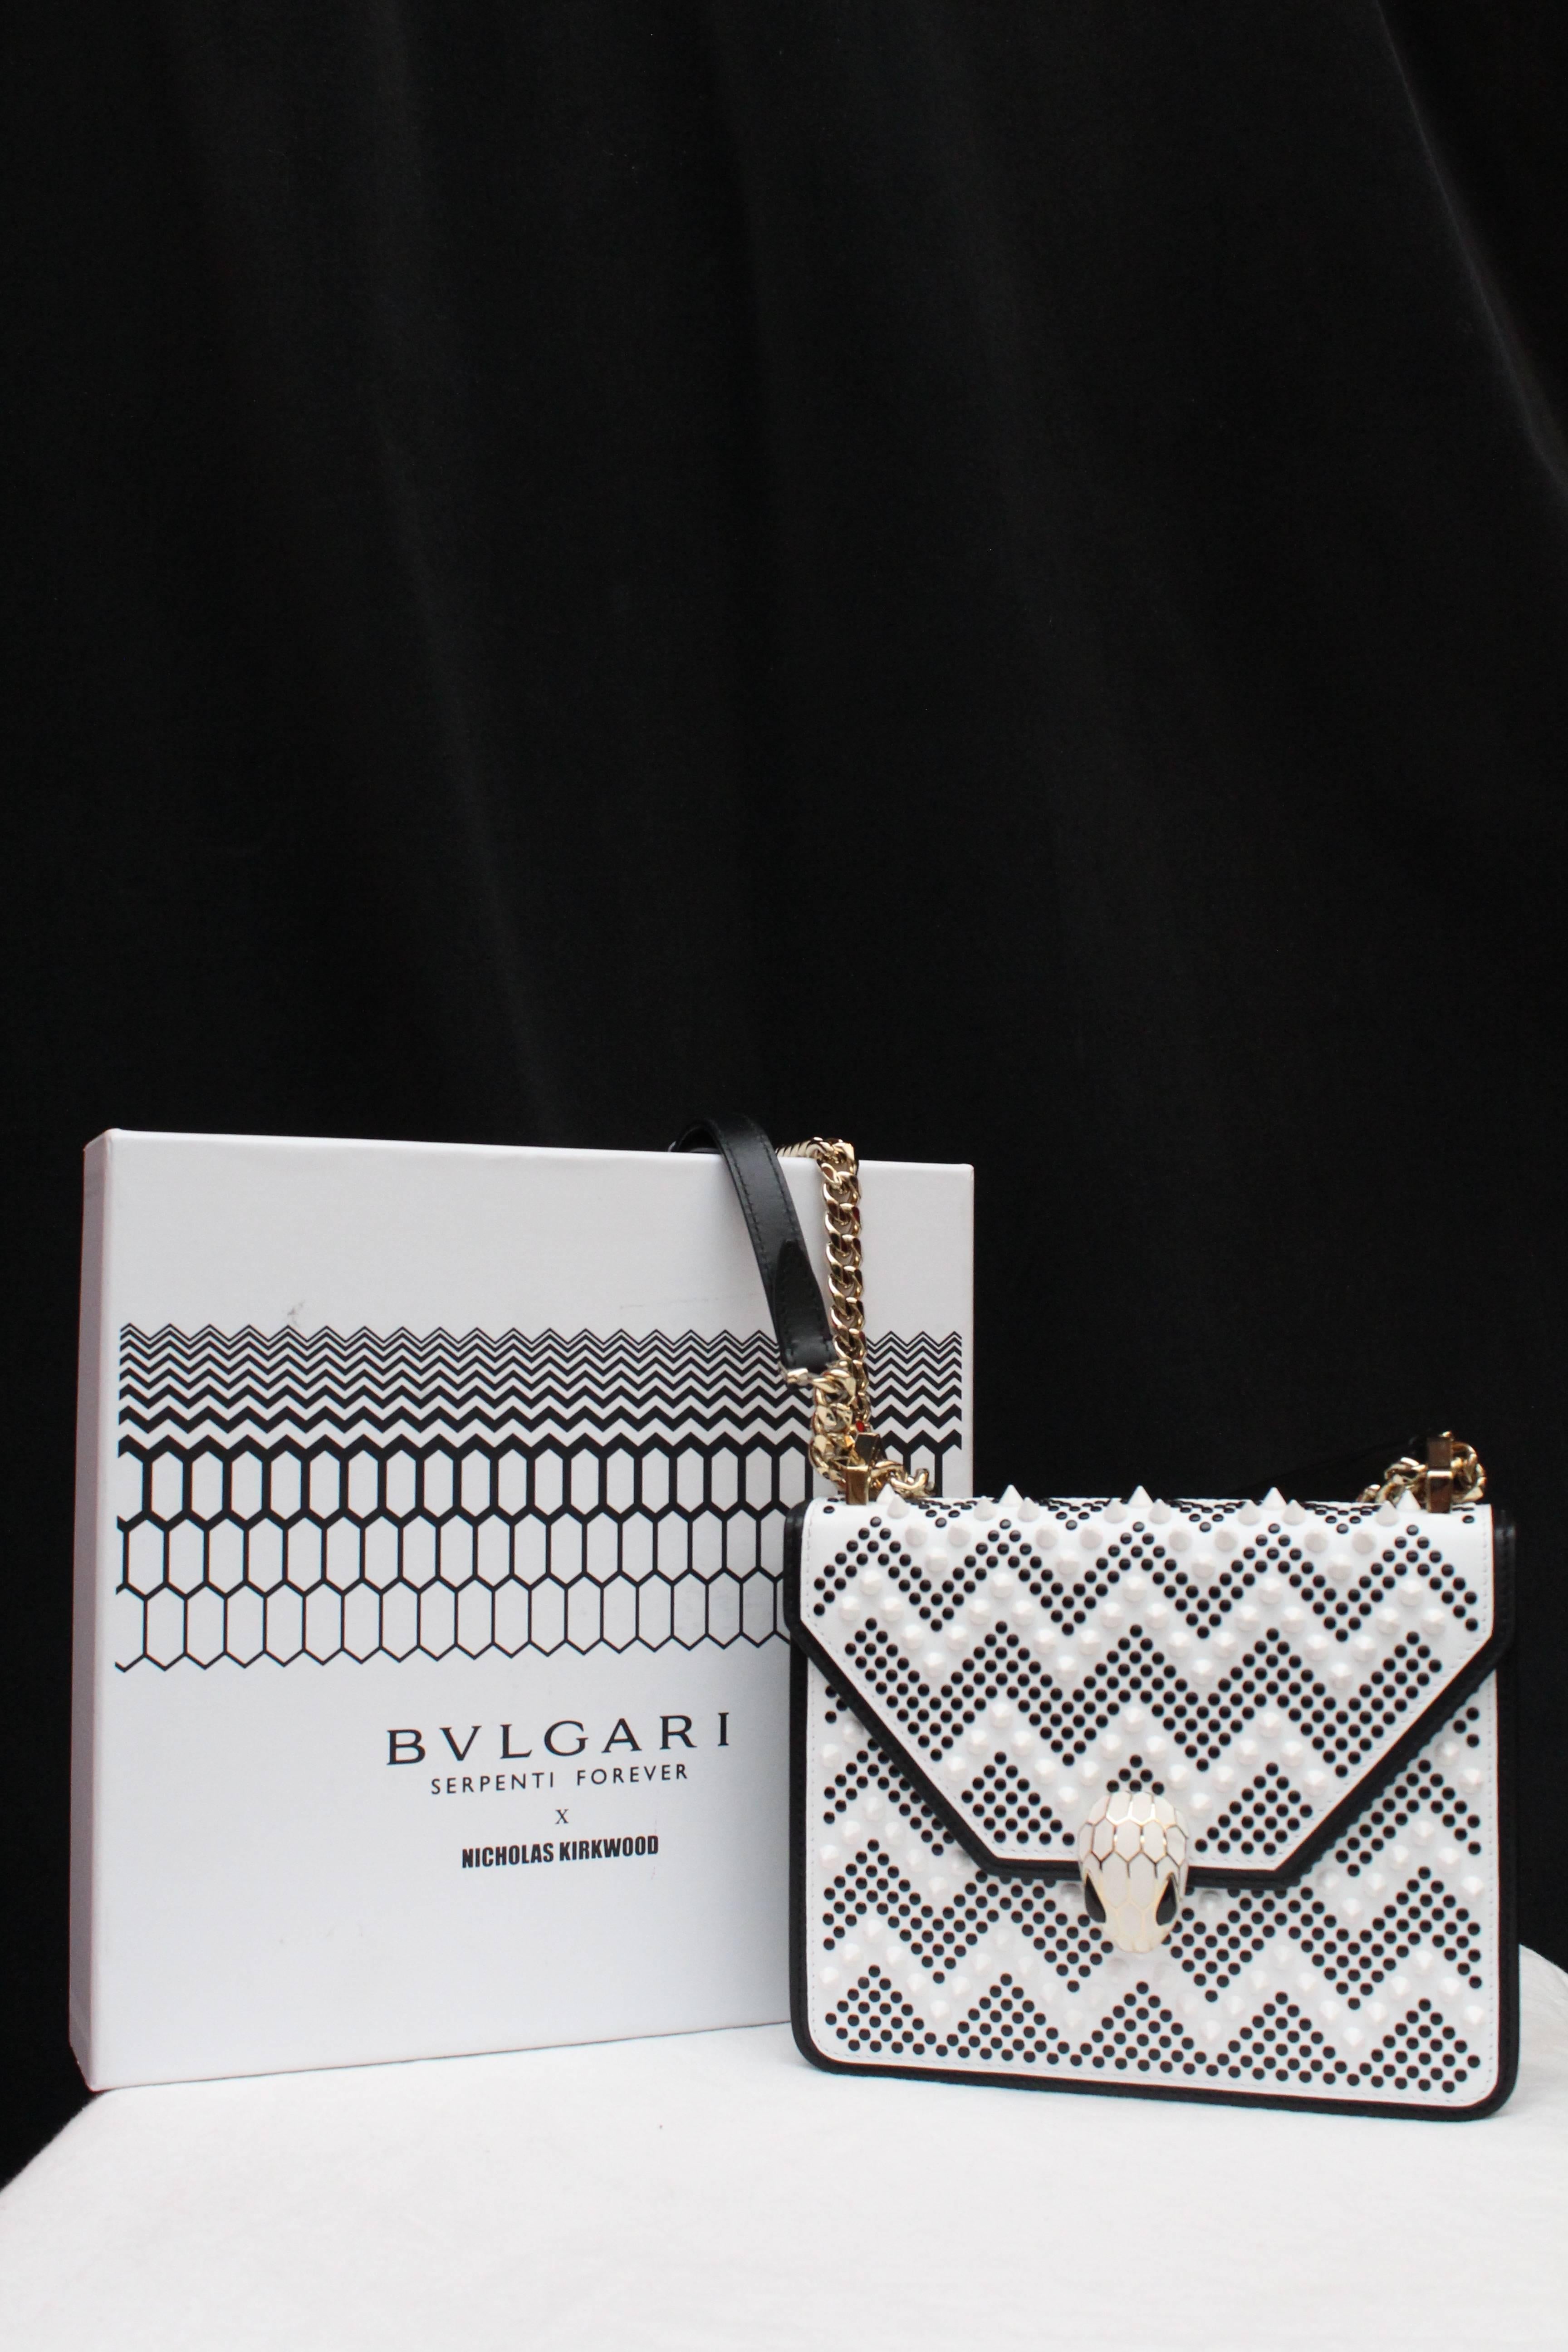 BULGARI (Made in Italy) Bag model Serpenti Forever Nicholas Kirkwood, made of black and white calf skin decorated with a studded tonal chevron pattern. The Serpenti clasp is composed of brass and white enamel with onyx eyes. Gilded metal curb chain